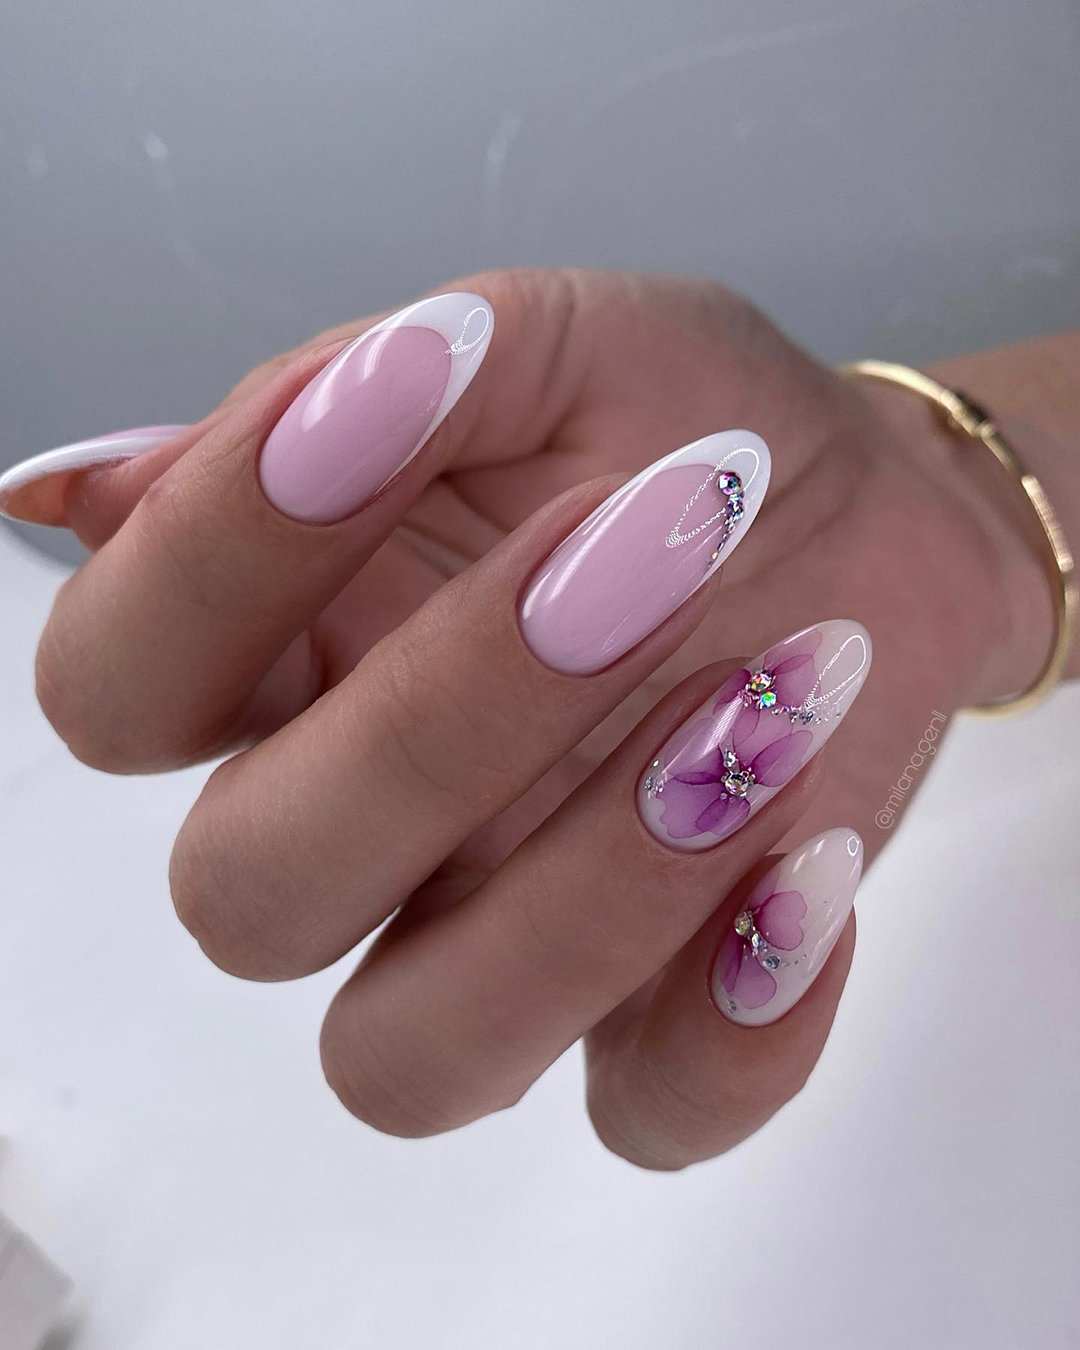 pink and white nails wedding with flower petals painted milana.gen11